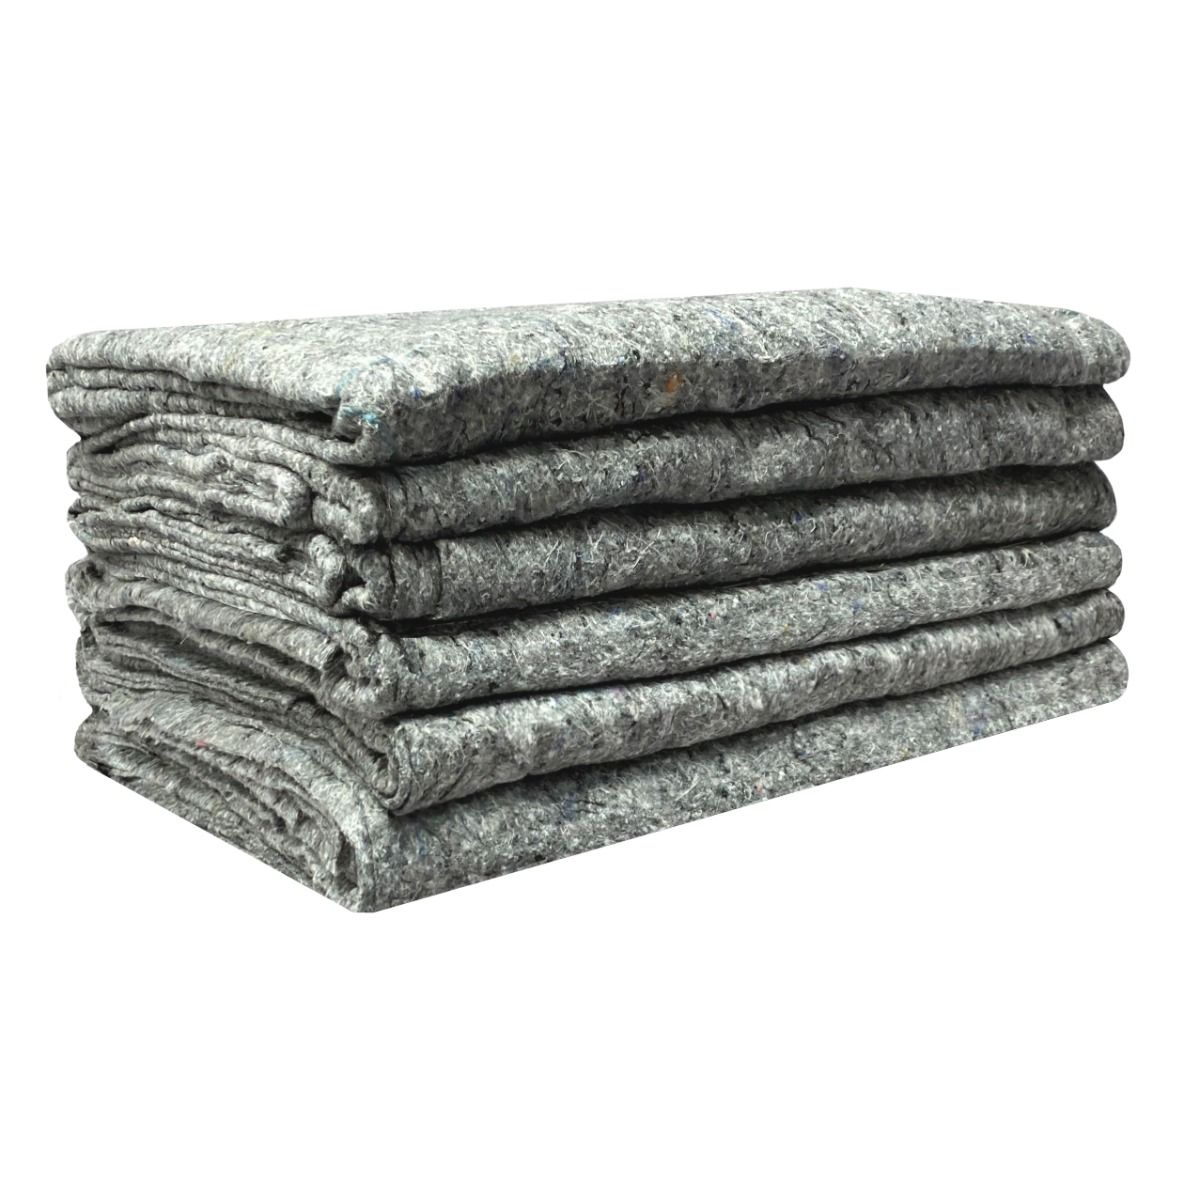 Uboxes A0022VP06 Textile Moving Blankets, Grey - 6 pack